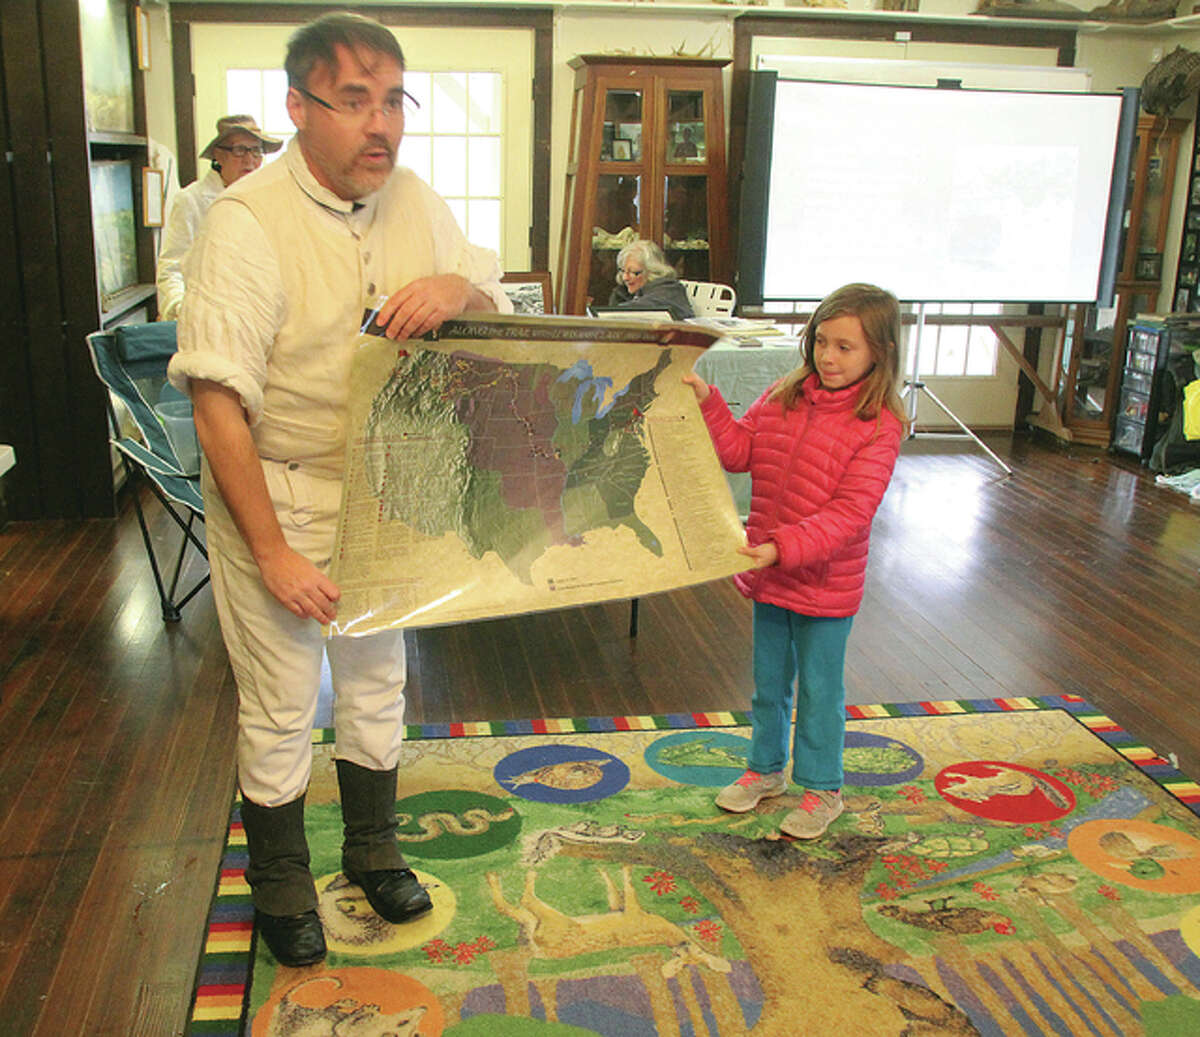 Brad Winn, site manager at the Lewis and Clark State Historic Site, uses a map with the help of Samantha Hall, 6, to talk about the Lewis and Clark Expedition during “Living History: A Walk Through Time” Saturday at The Nature Institute in Godfrey.